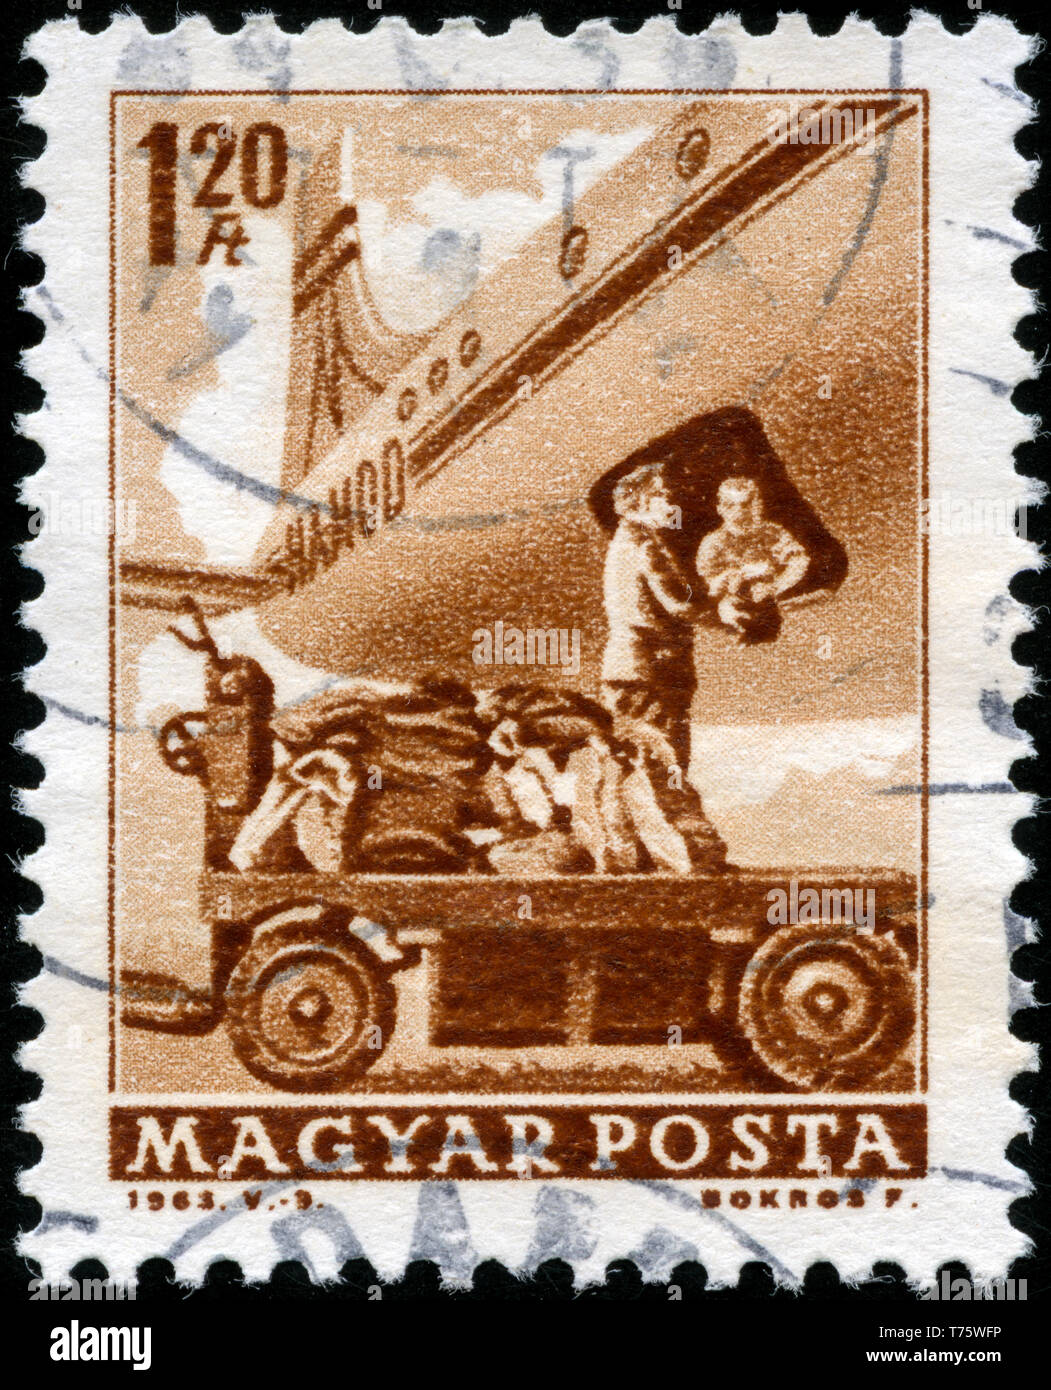 Postage stamp from Hungary in the Transport and Telecommunication series issued in 1963 Stock Photo